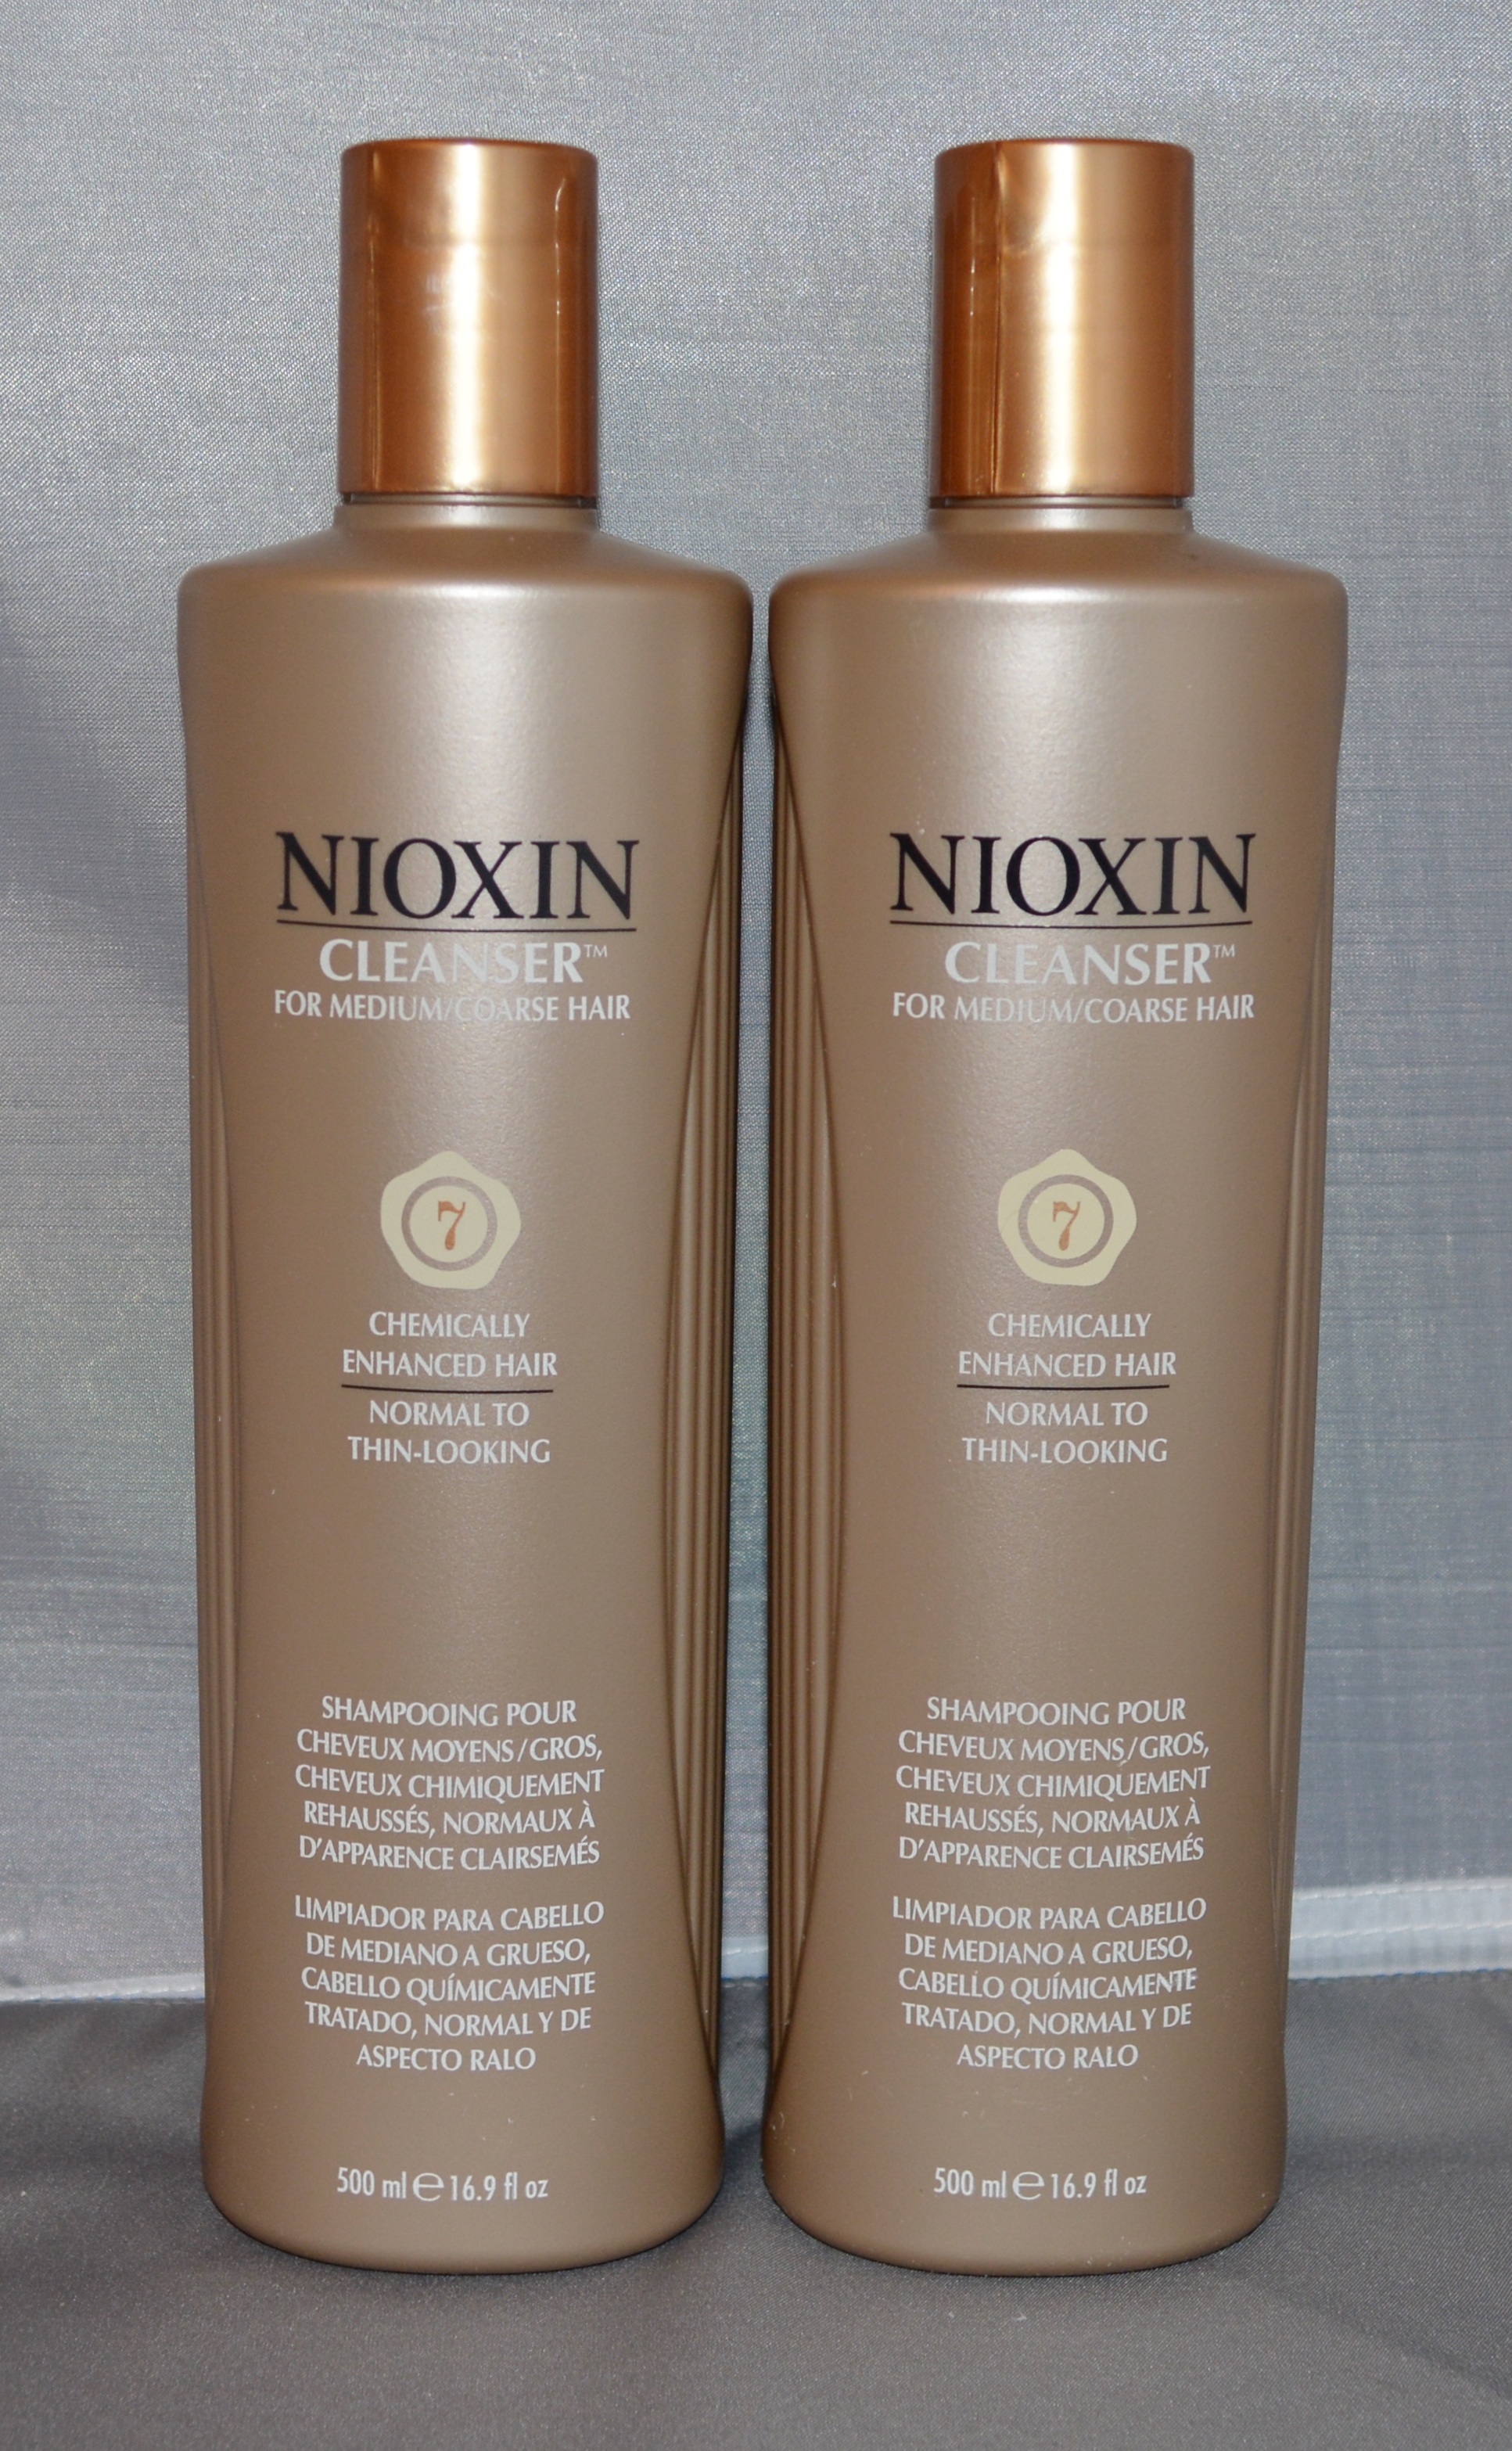 Nioxin Cleanser System 7 Medium/Coarse/Treated/Normal to Thin-Looking Hair 16.9 oz (2 pack)